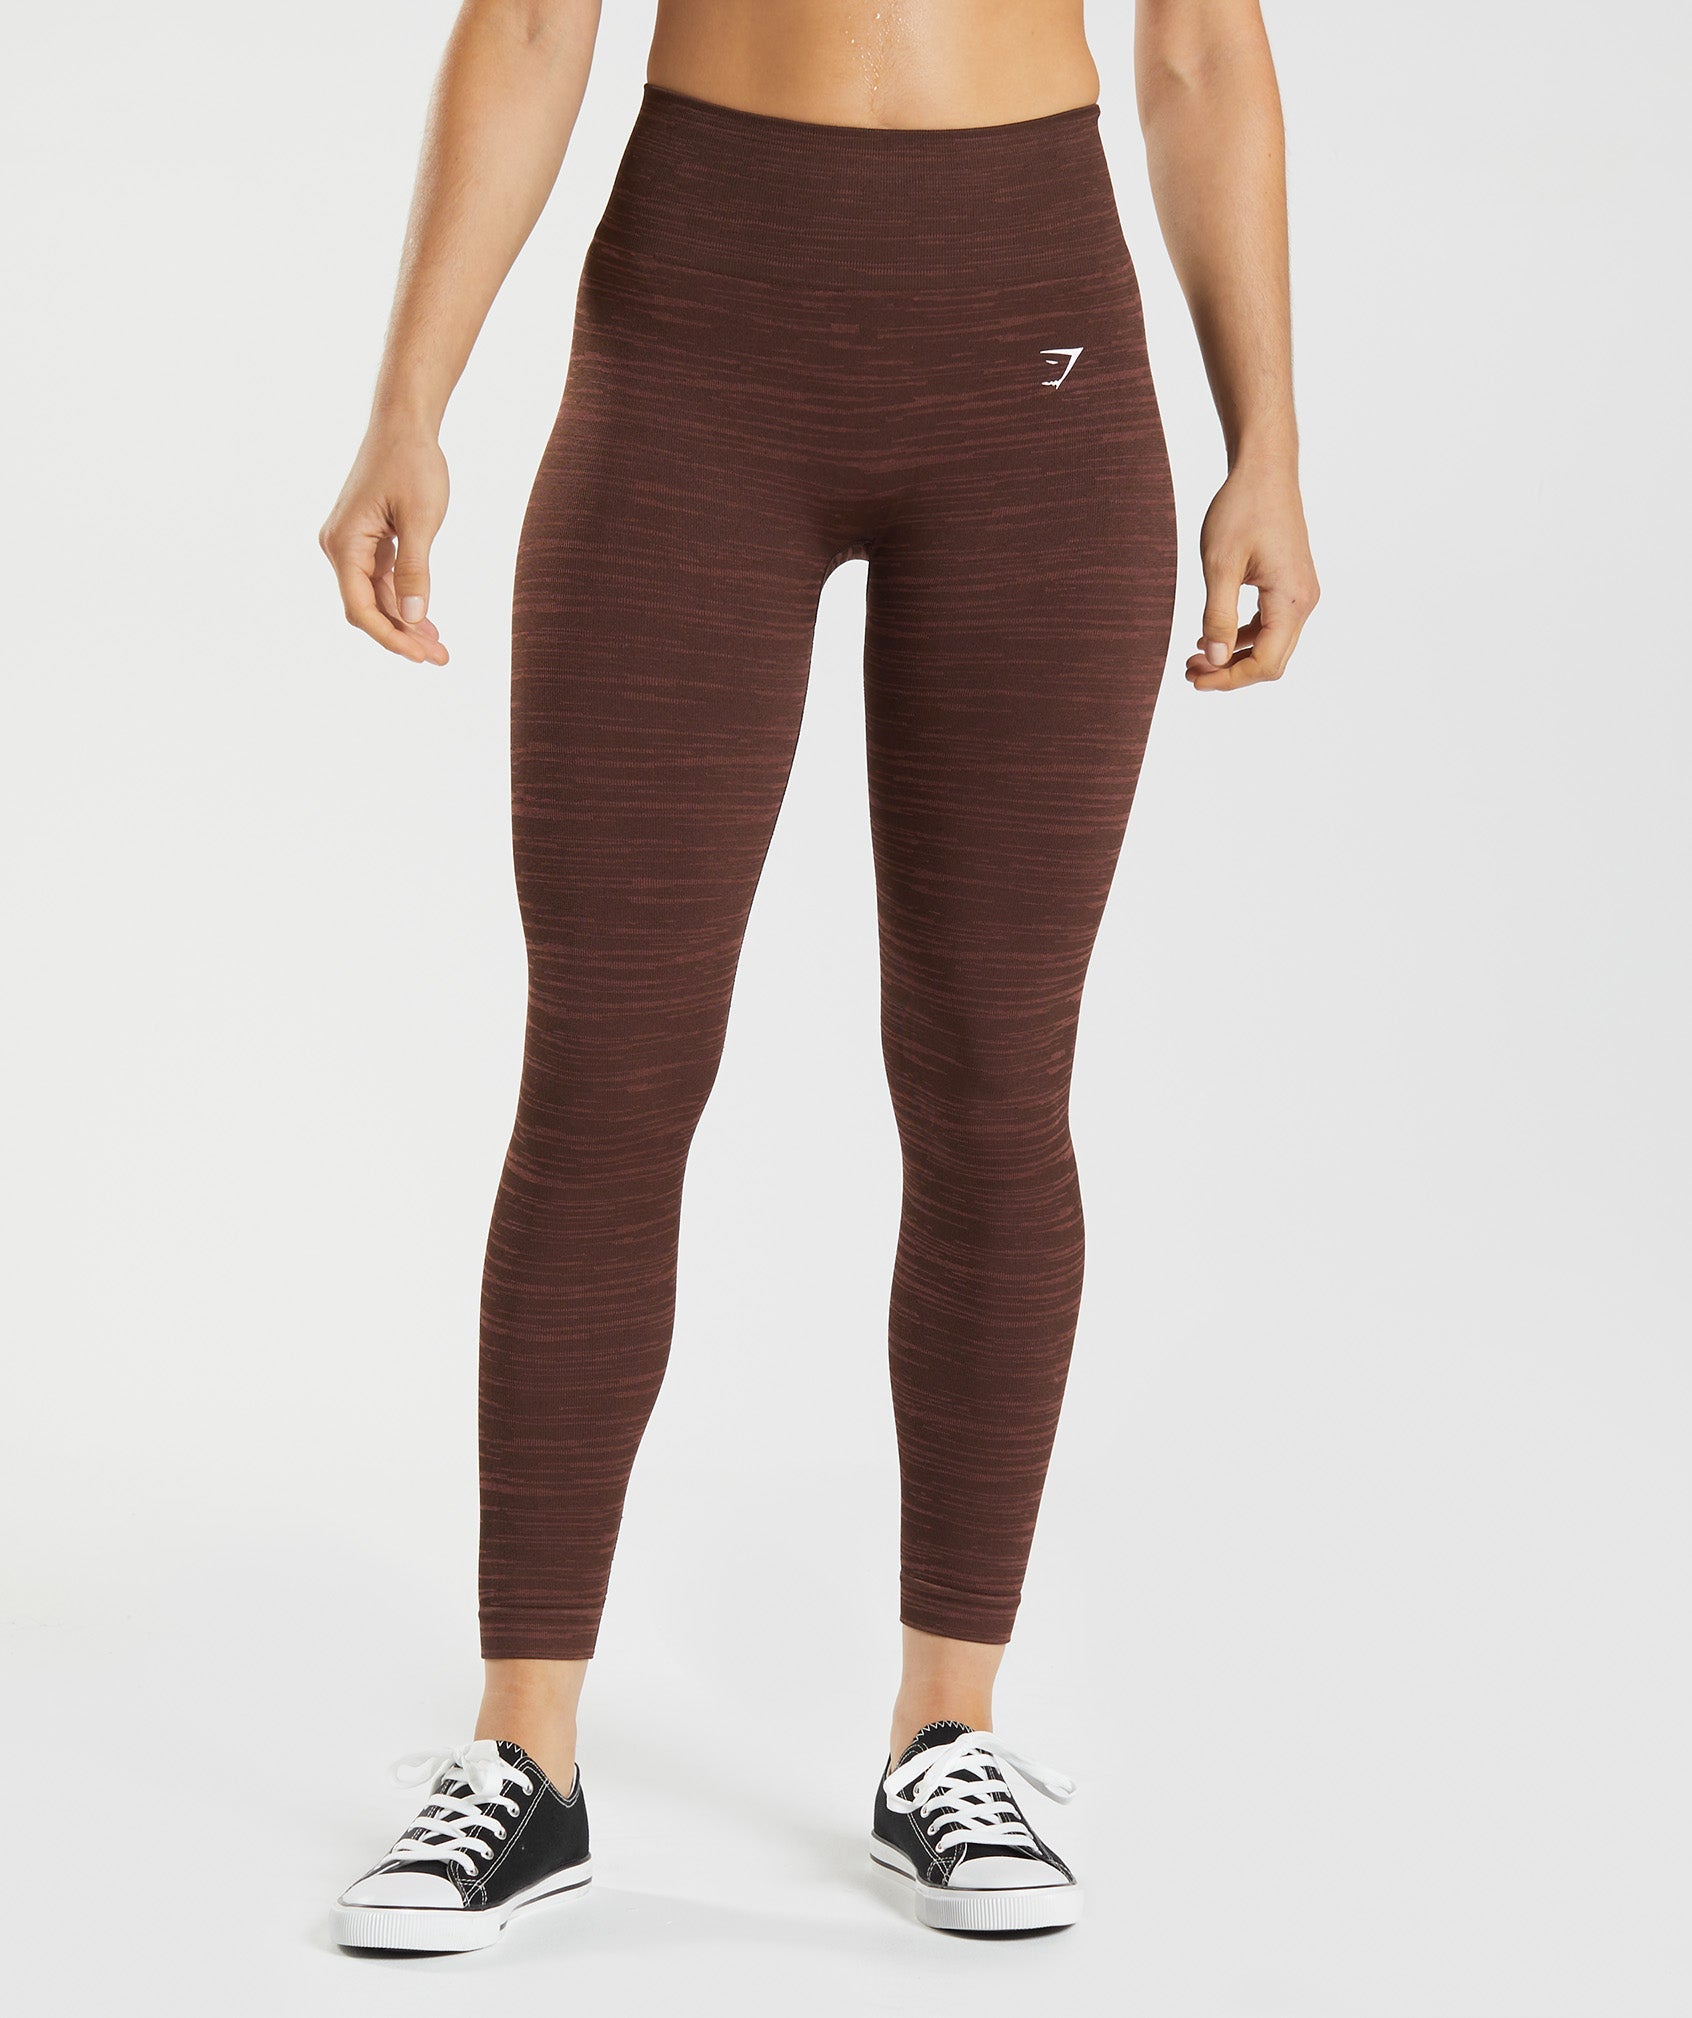 Gymshark Women's Fit Seamless Mid Rise Leggings, Beige with Gray Logo, Size  S